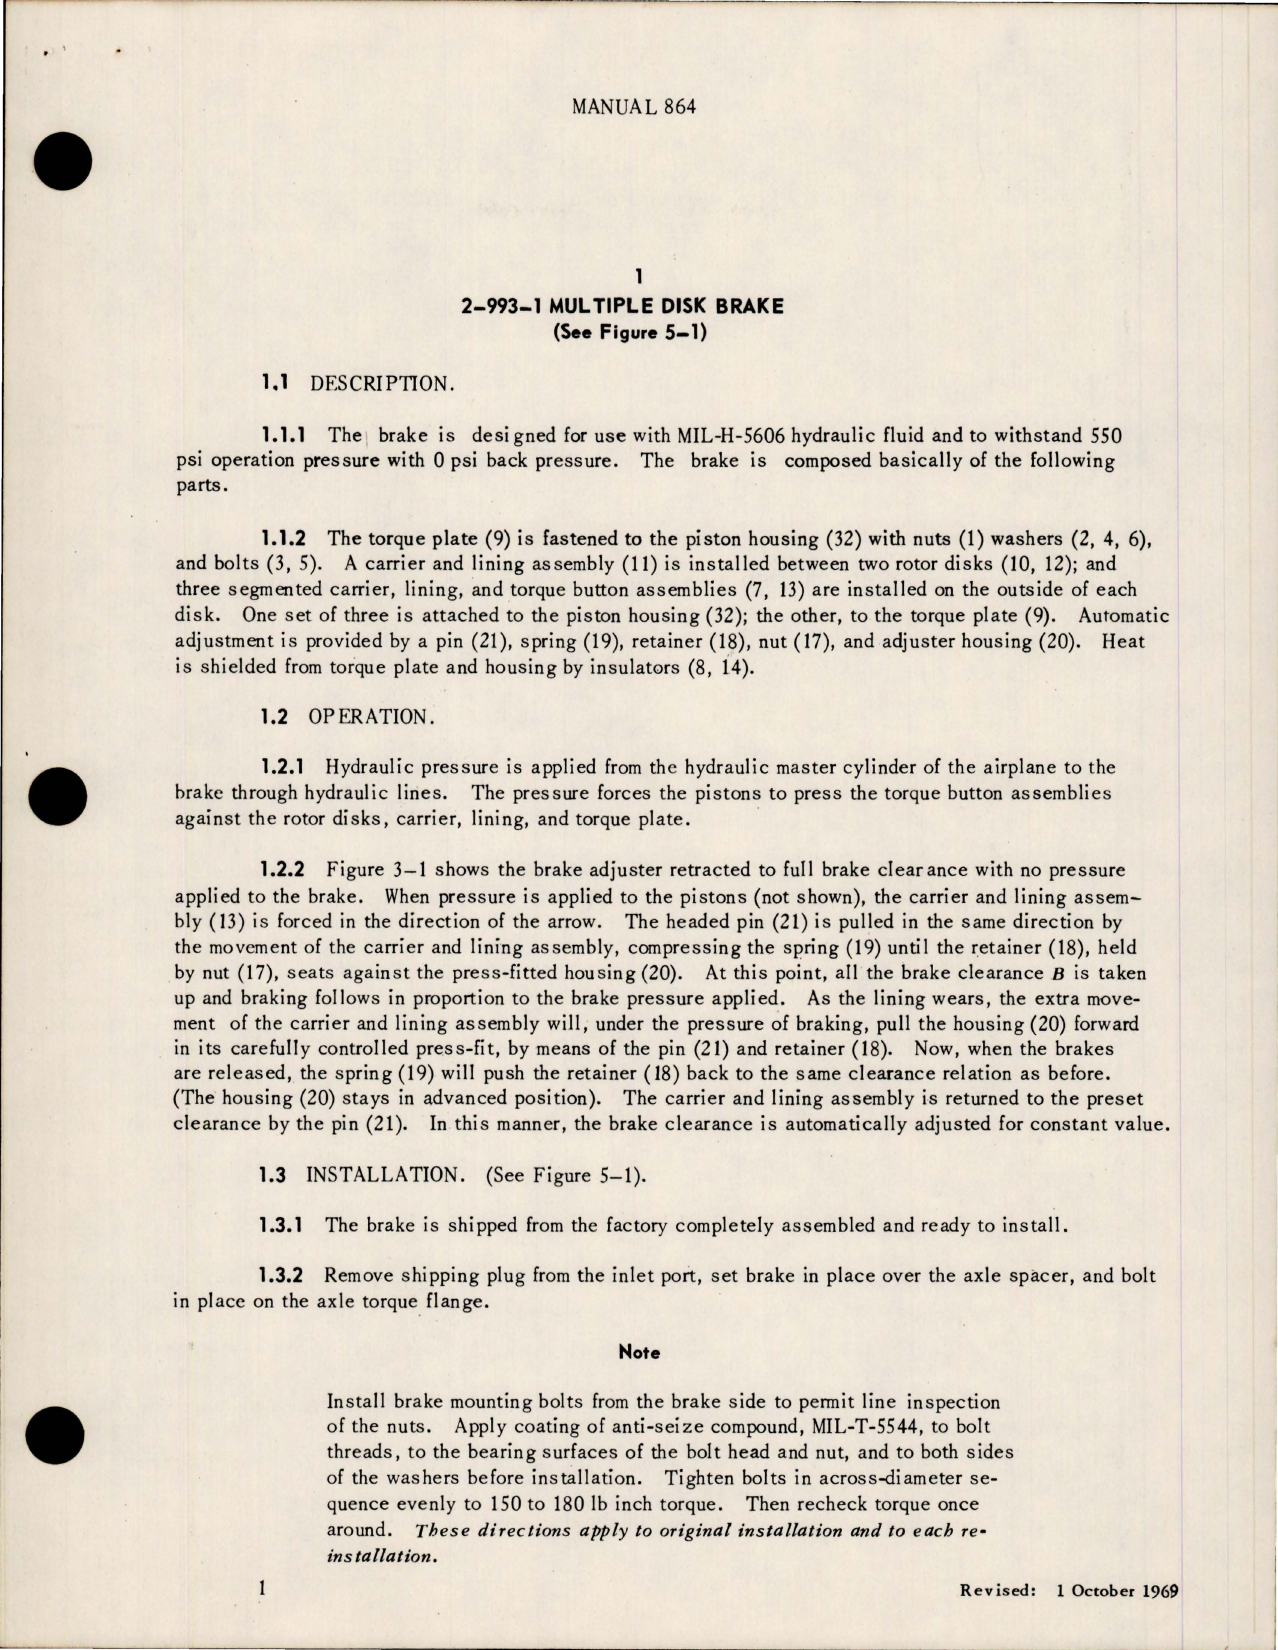 Sample page 9 from AirCorps Library document: Installation, Maintenance and Overhaul for Multiple Disk Brake 2-993-1 and Main Landing Gear 3-1174 and 3-1225